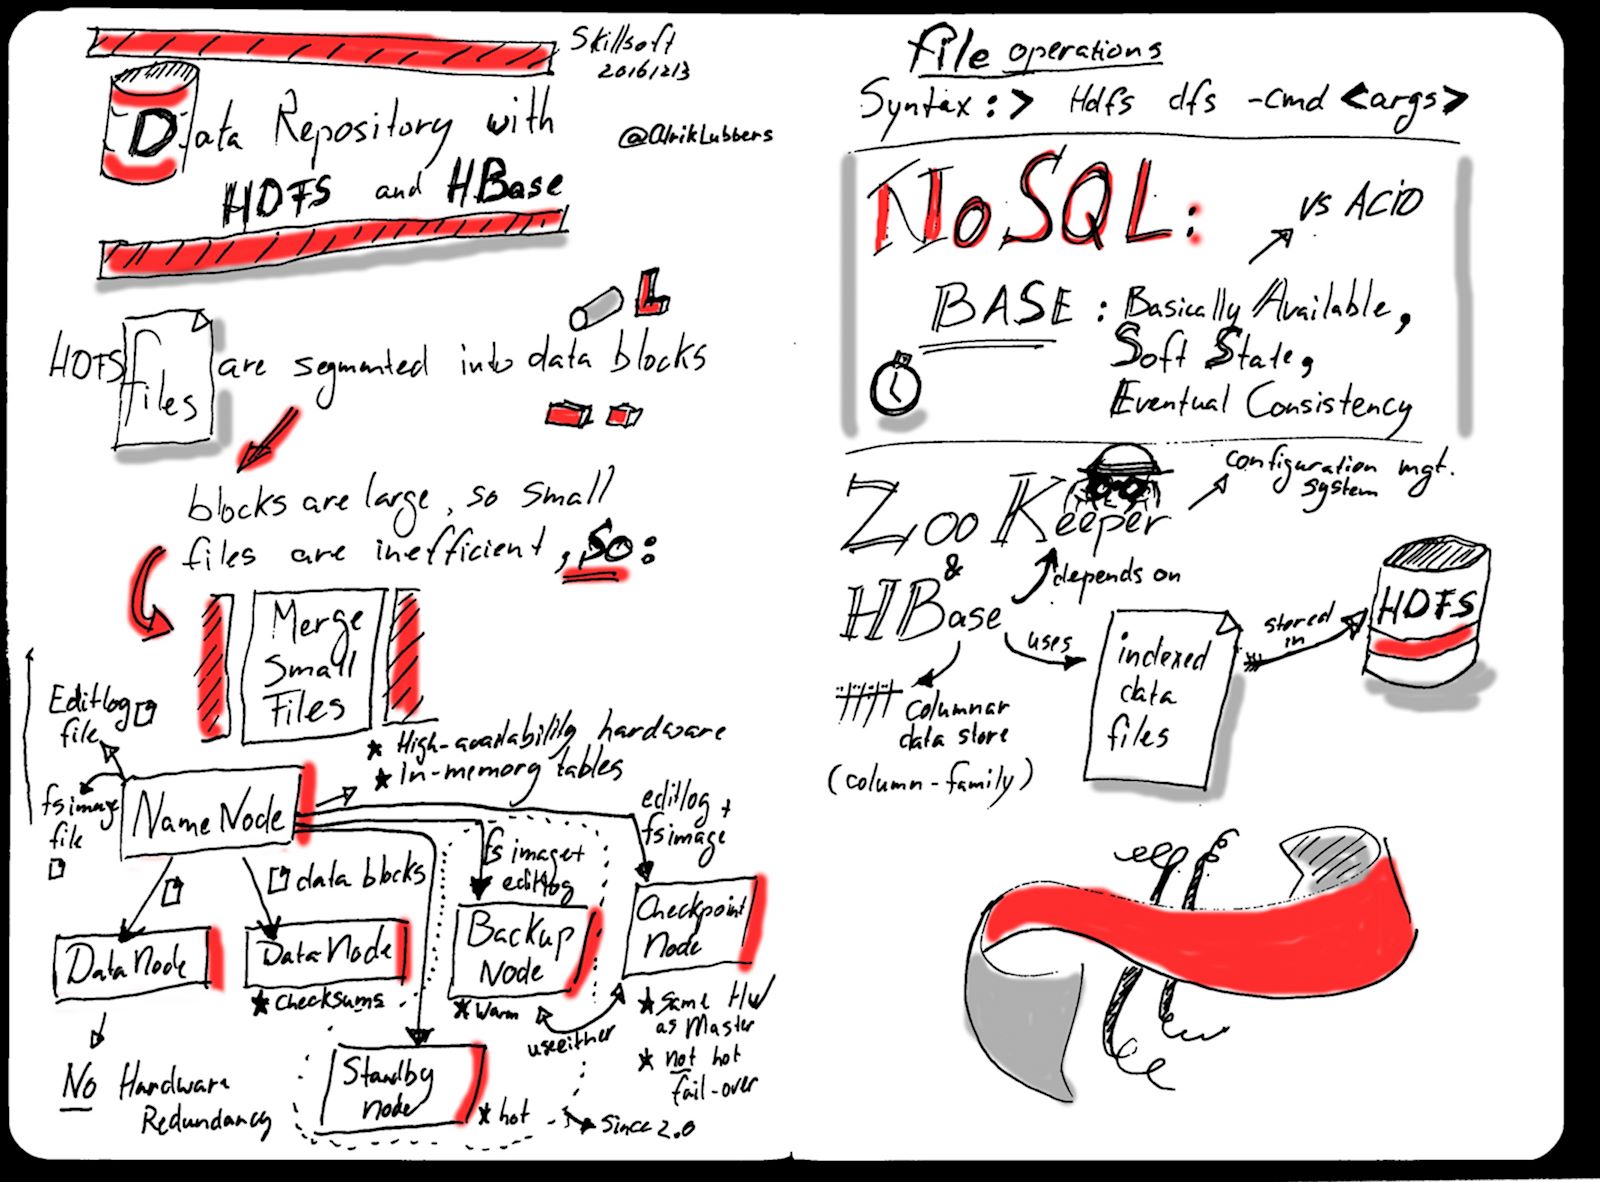 Sketchnote: Data Repository with HDFS and HBase